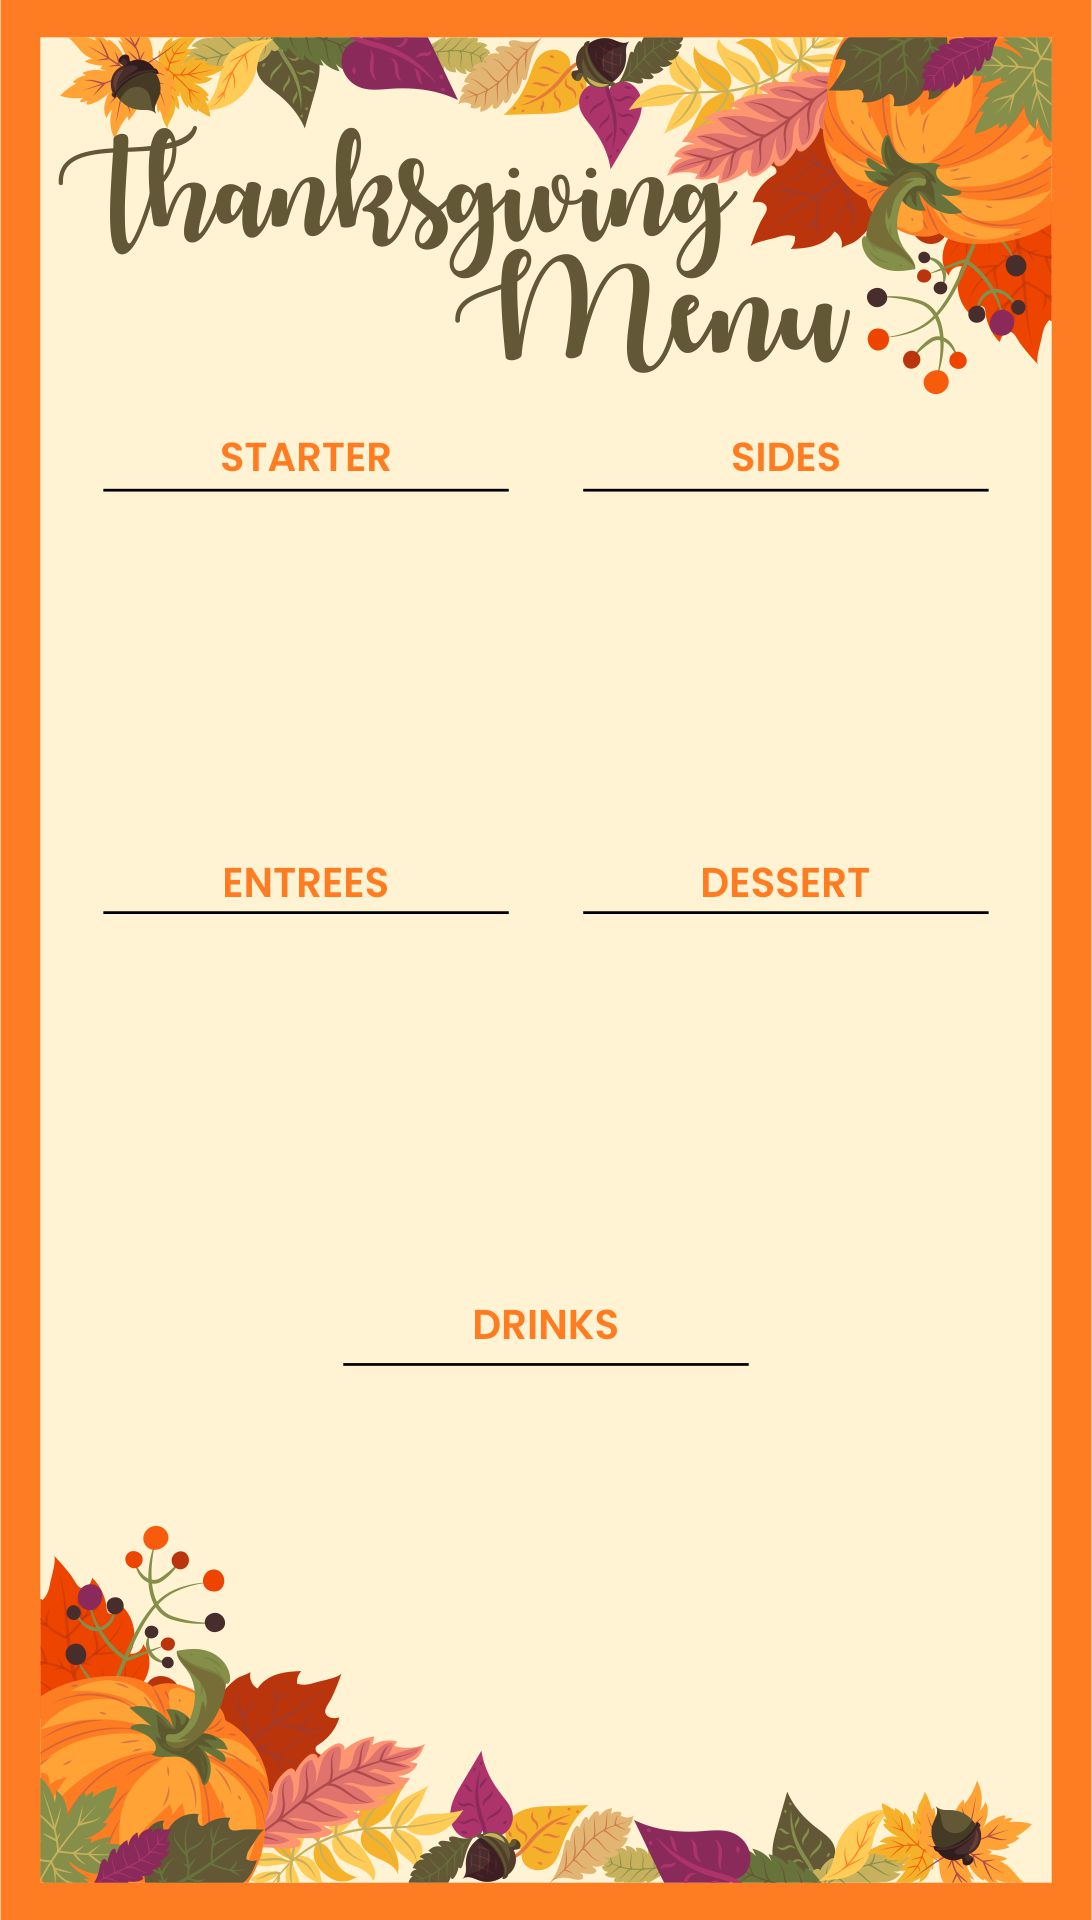 8 Best Images of Free Printable Thanksgiving Menu Templates ...